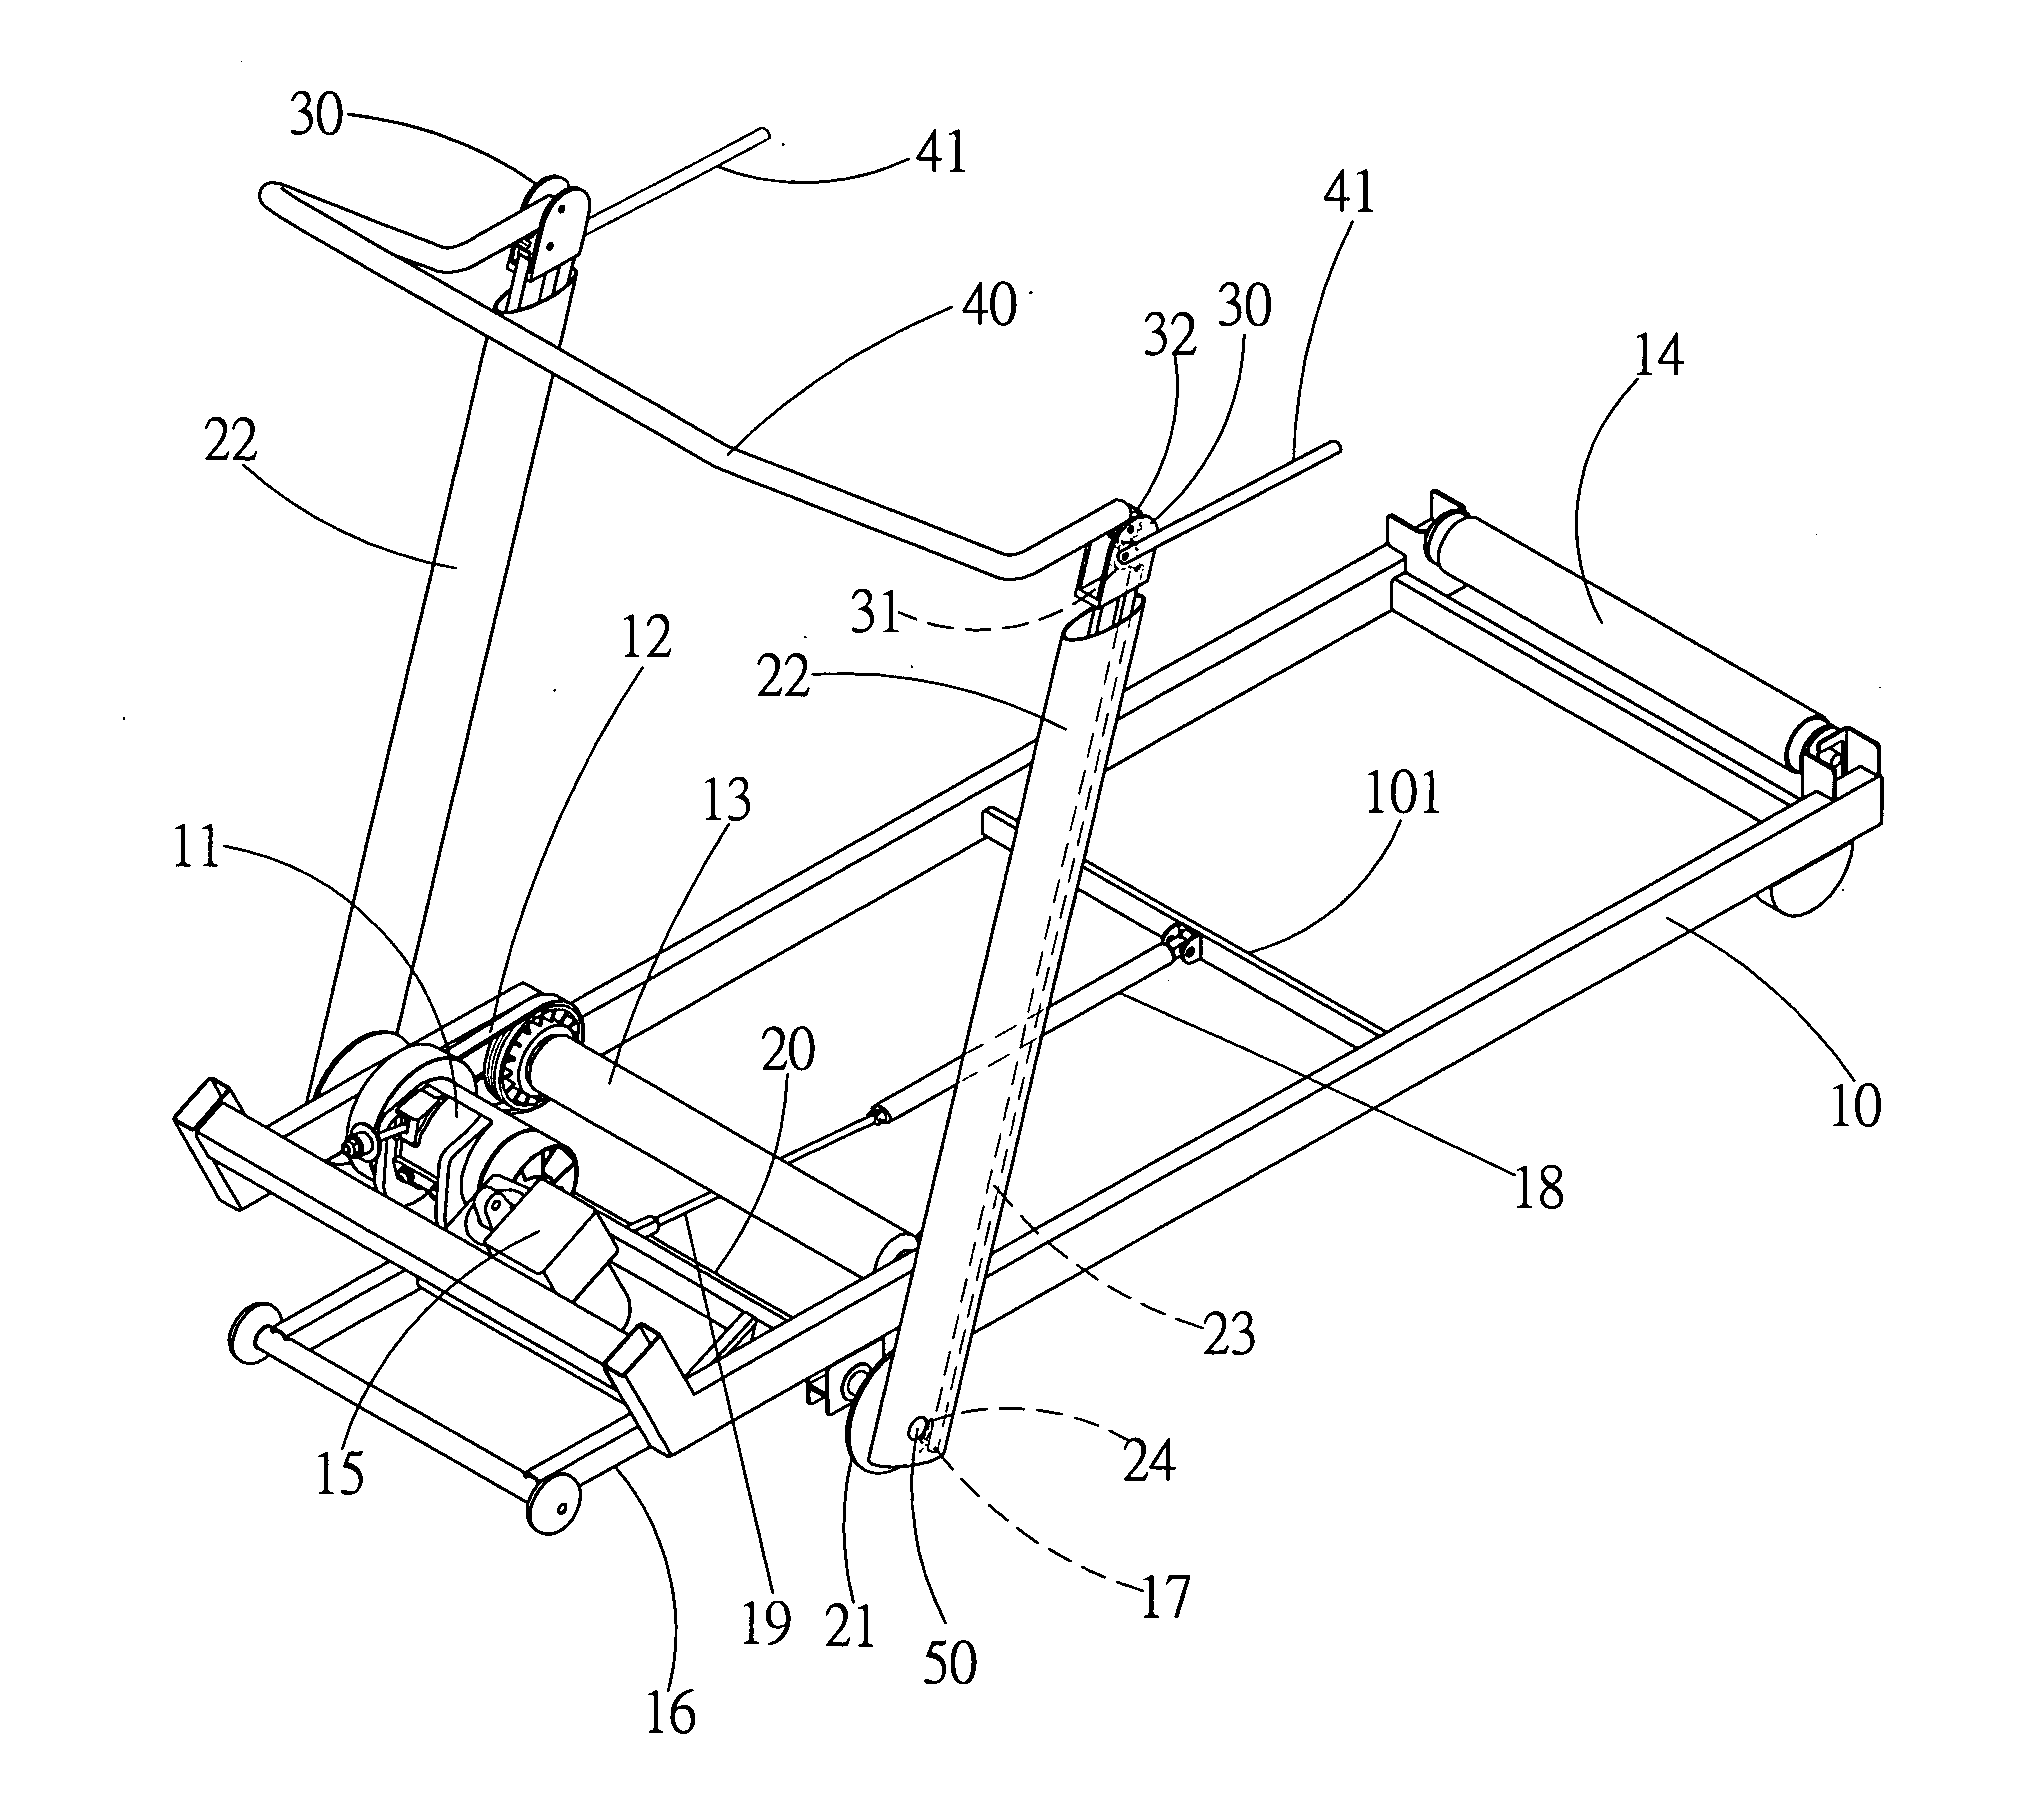 Folding mechanism for a handrail frame assembly of a treadmill